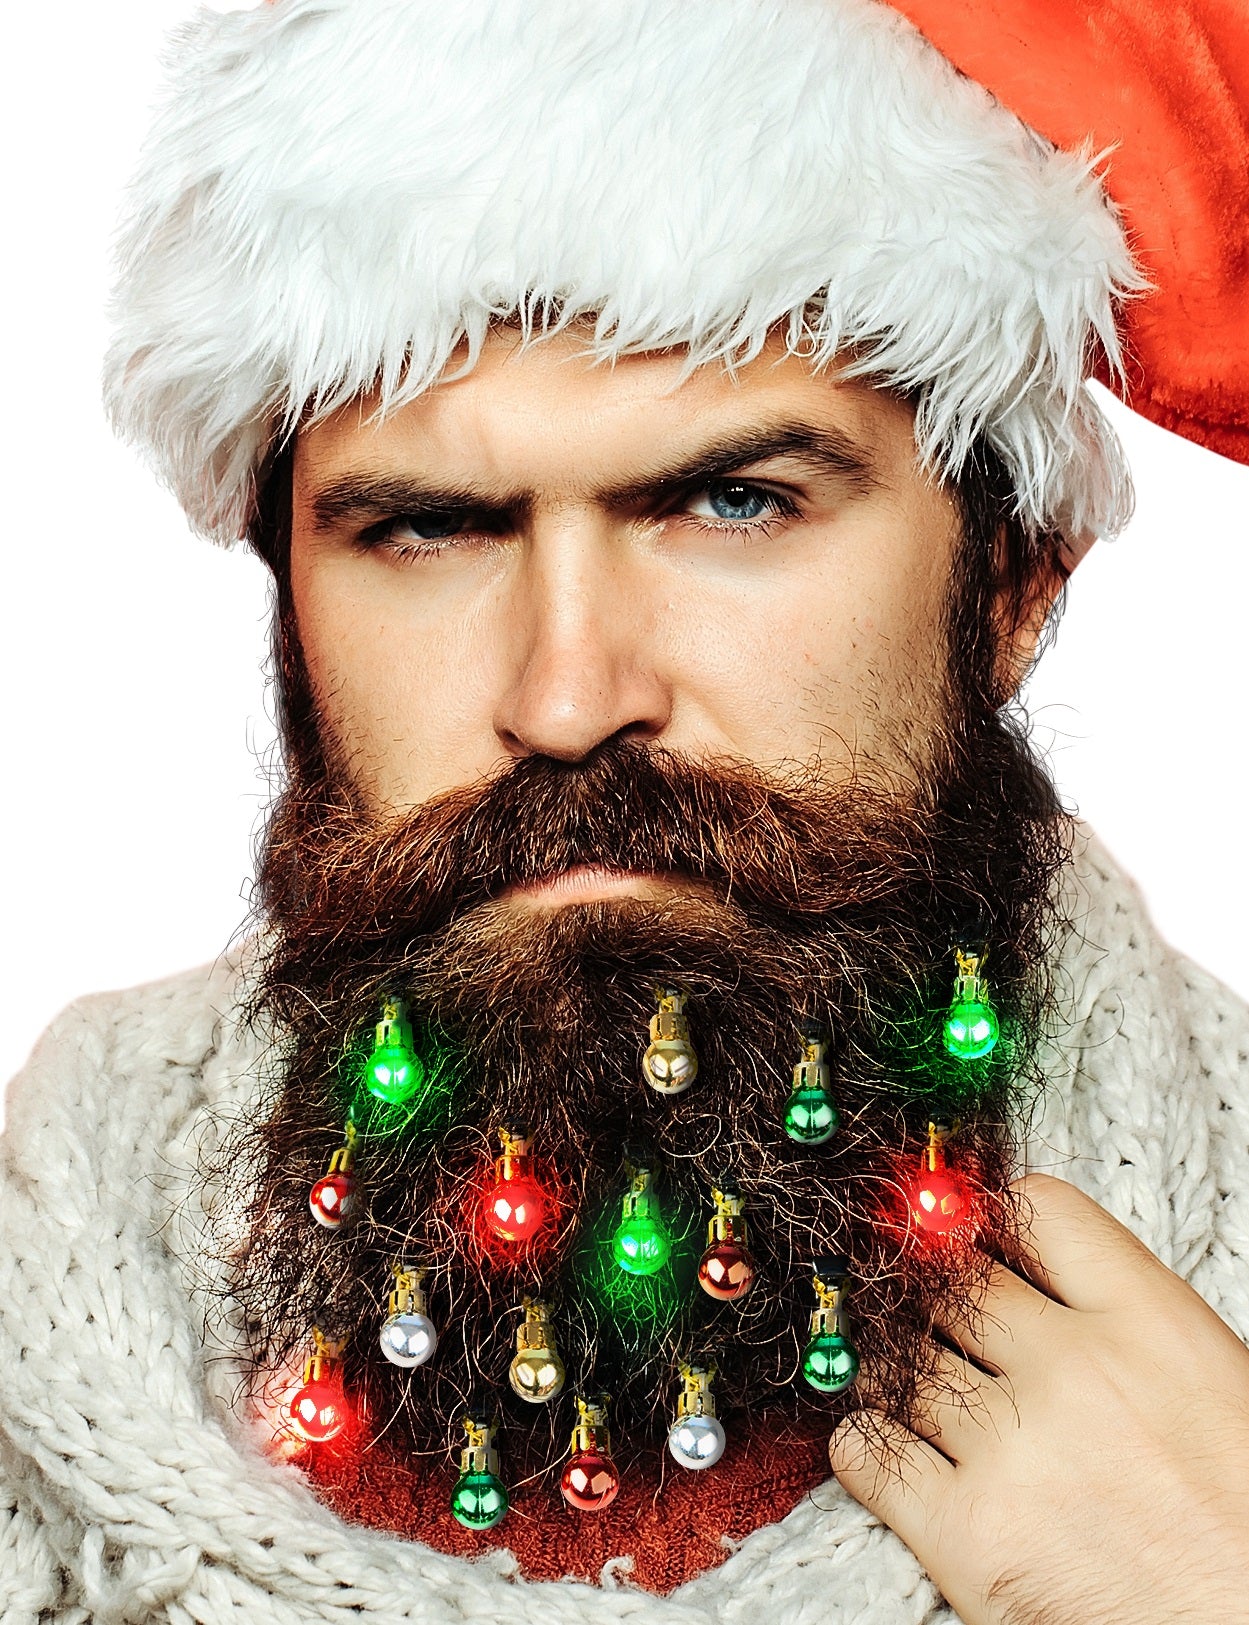 Beardaments, Tiny Christmas Ornaments and Festive Glitter Used to